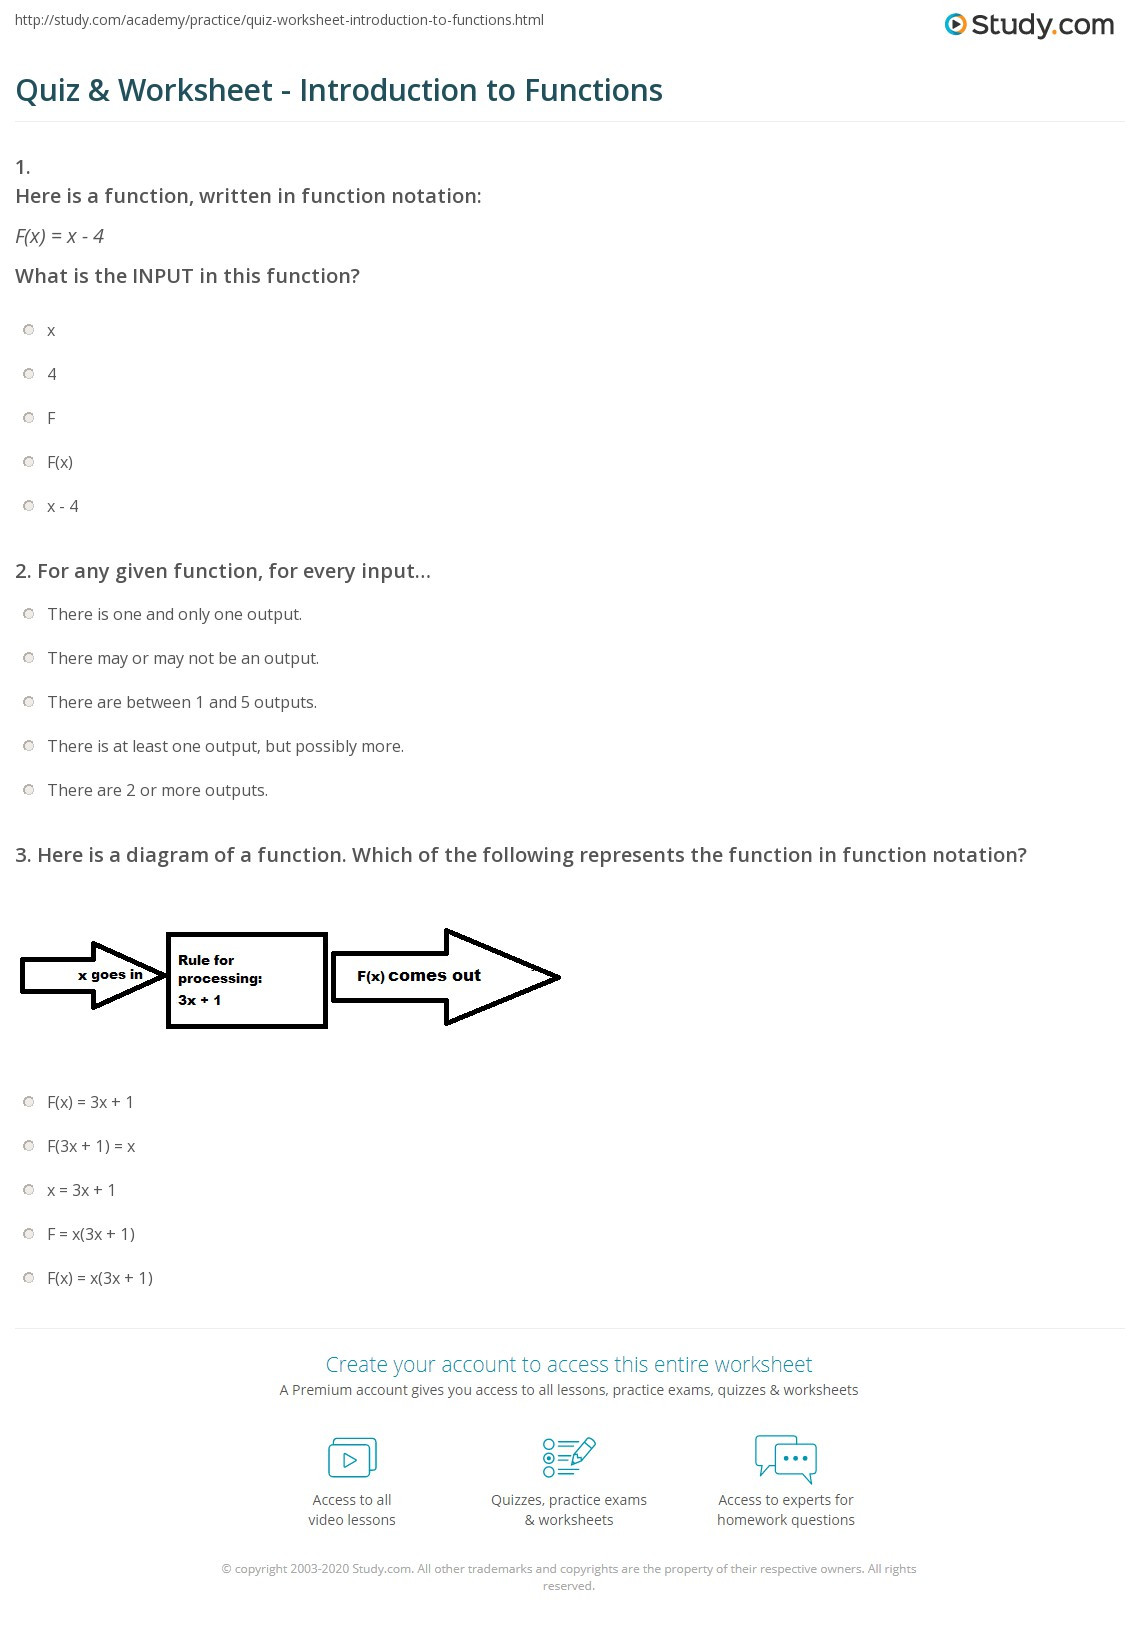 Function Notation Worksheet Answers Quiz &amp; Worksheet Introduction to Functions